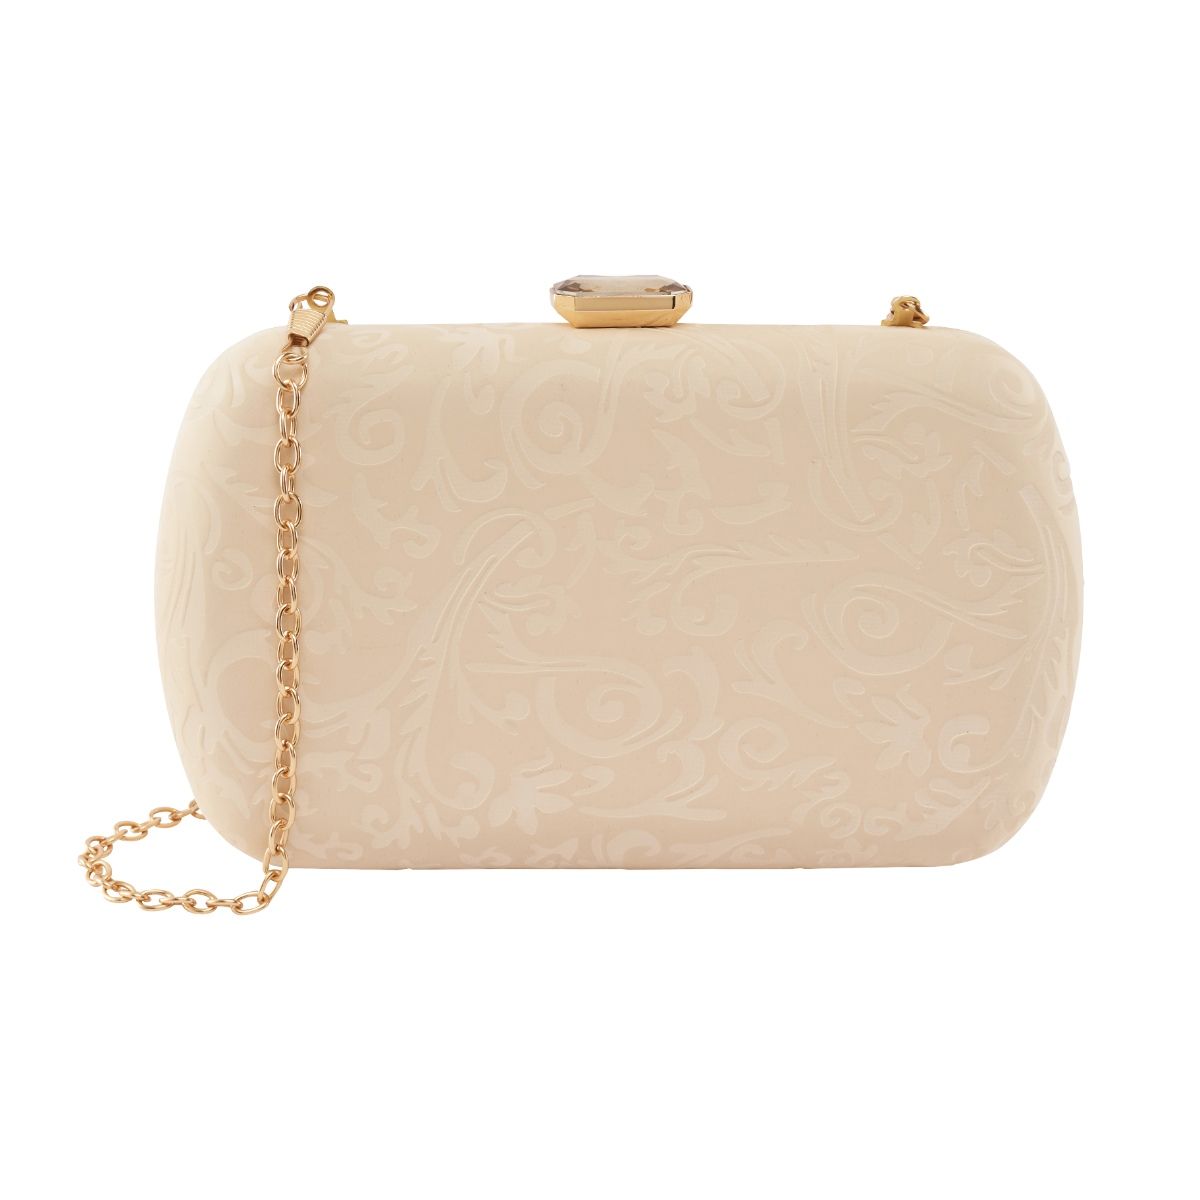 Icey Cream Mini Bag | Cream mini bag, Cream handbags, Evening bags